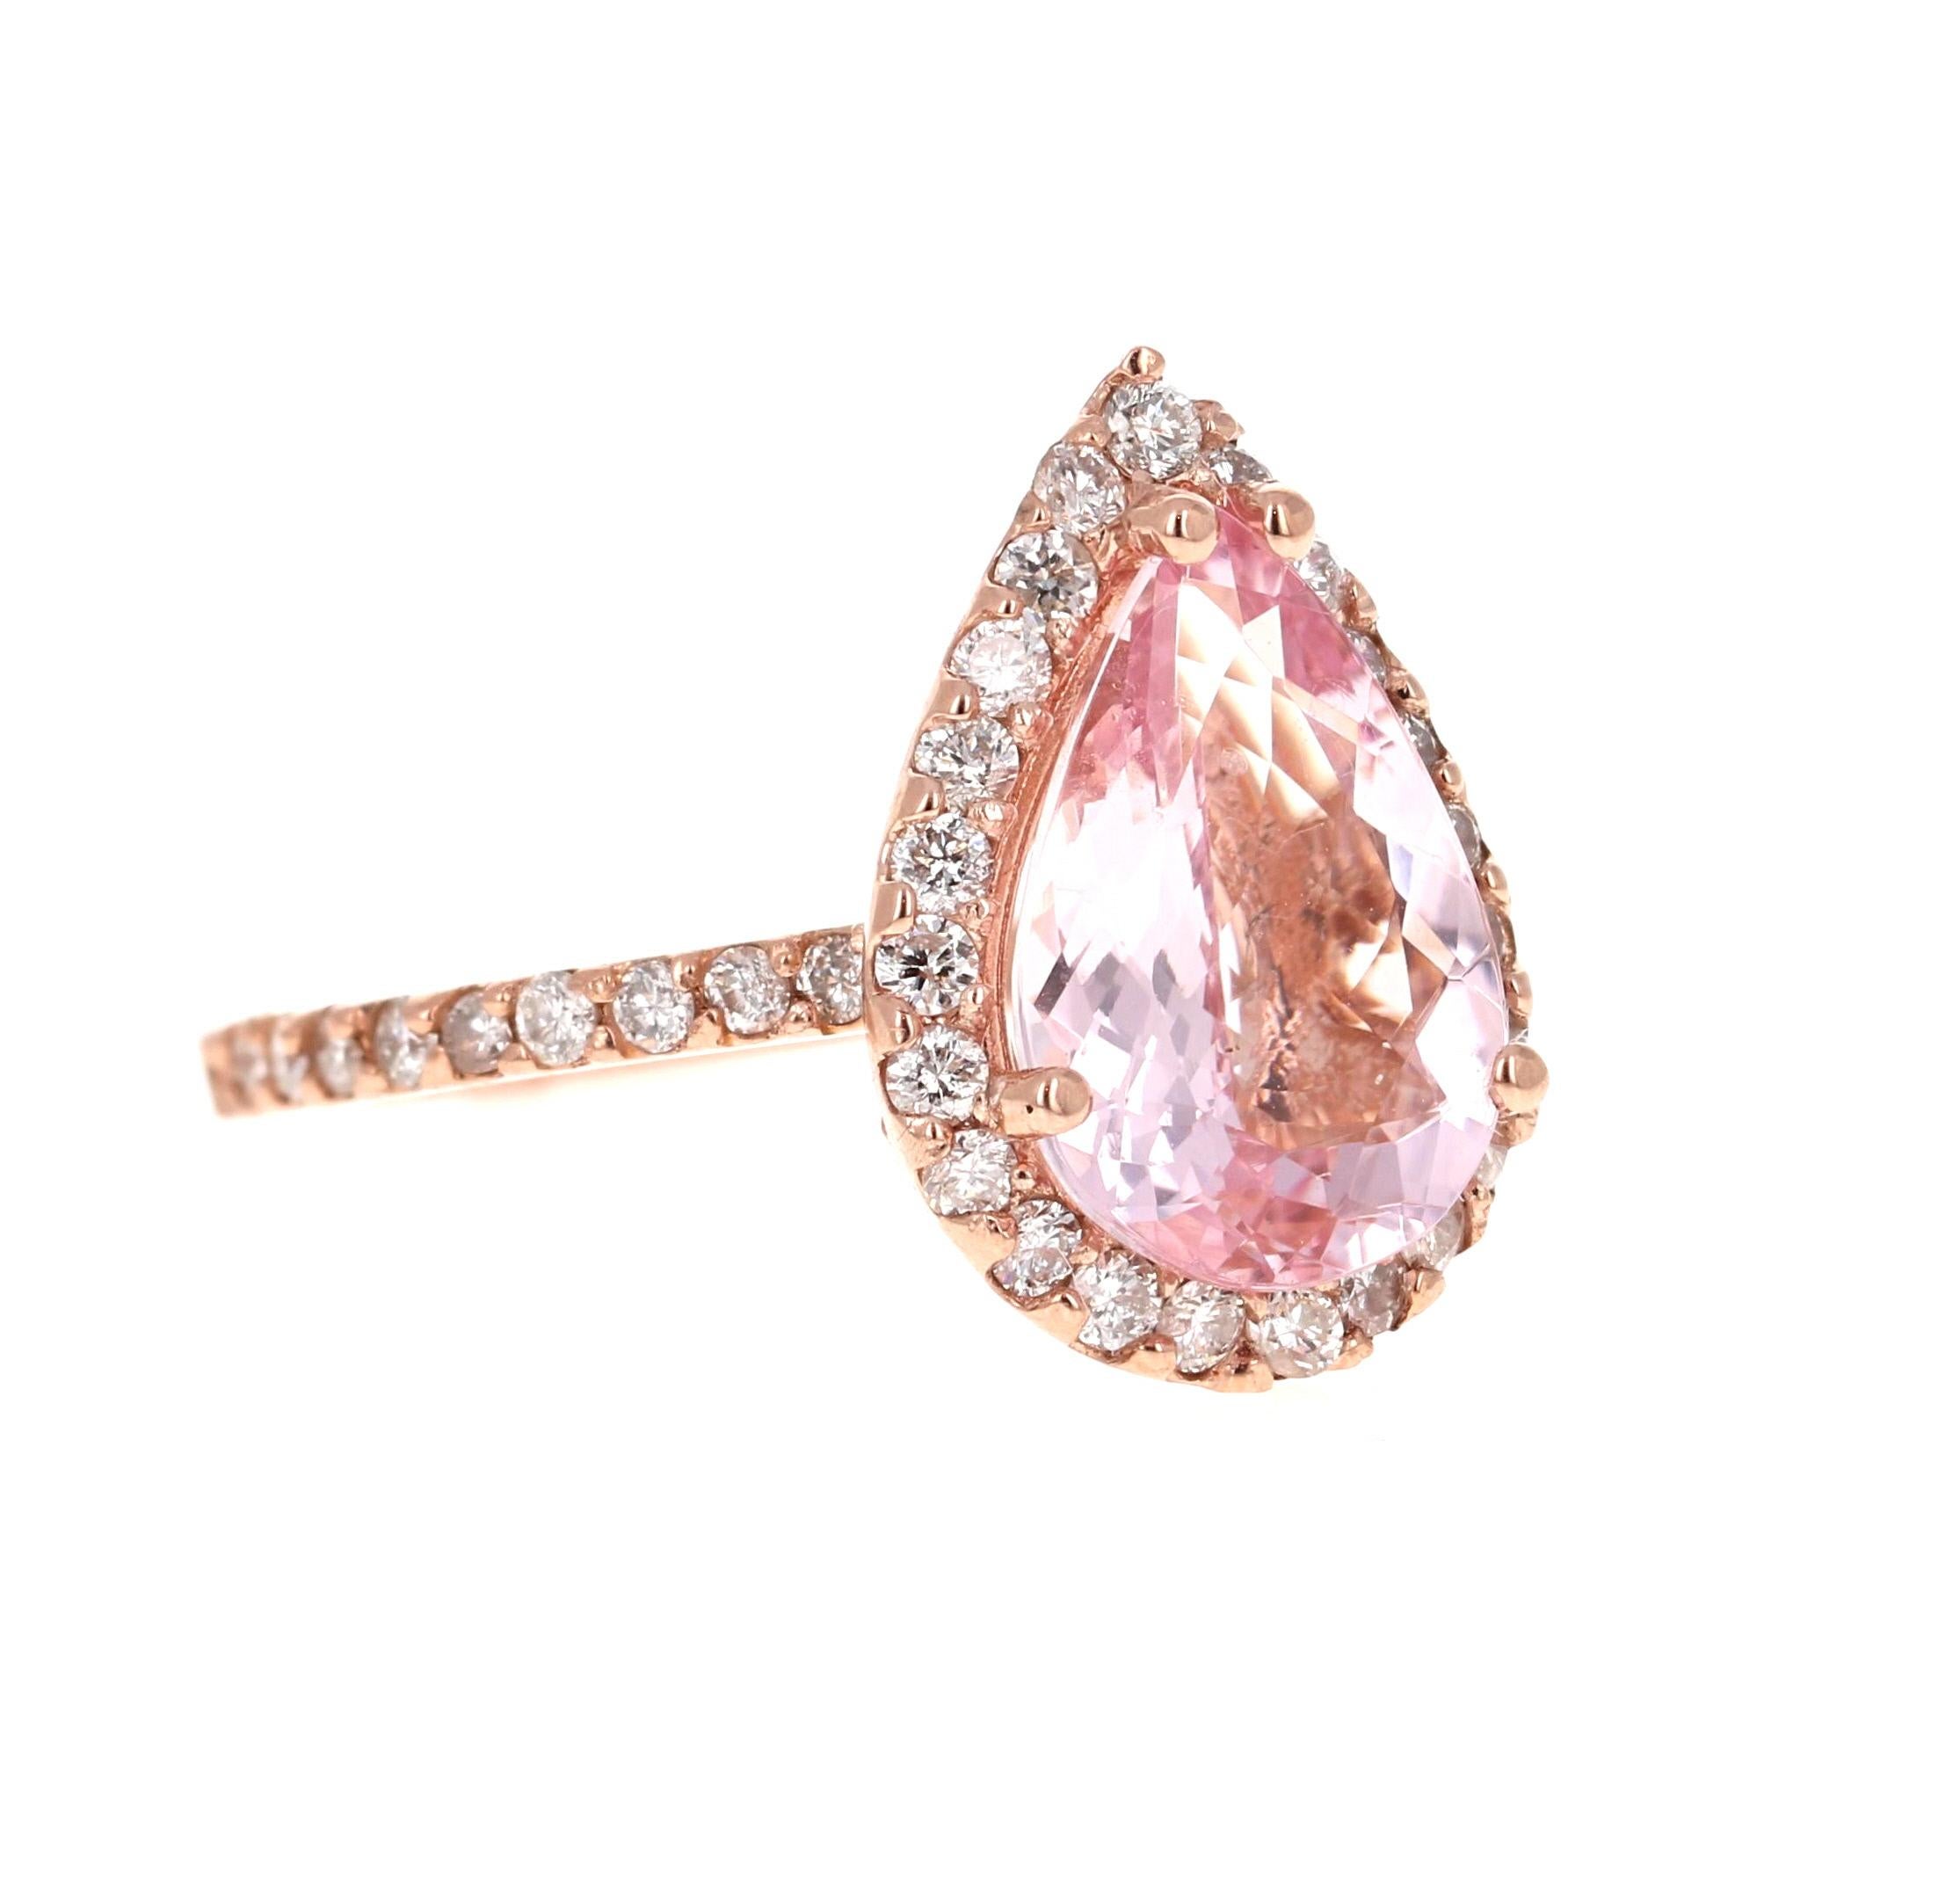 A lovely Engagement Ring Option or as an alternate to a Pink Diamond Ring! A Stunning Statement. 

This gorgeous and classy Morganite Diamond Ring has a 2.85 Carat Pear Cut Pink Morganite and has a Halo of 44 Round Cut Diamonds that weigh 0.76carats